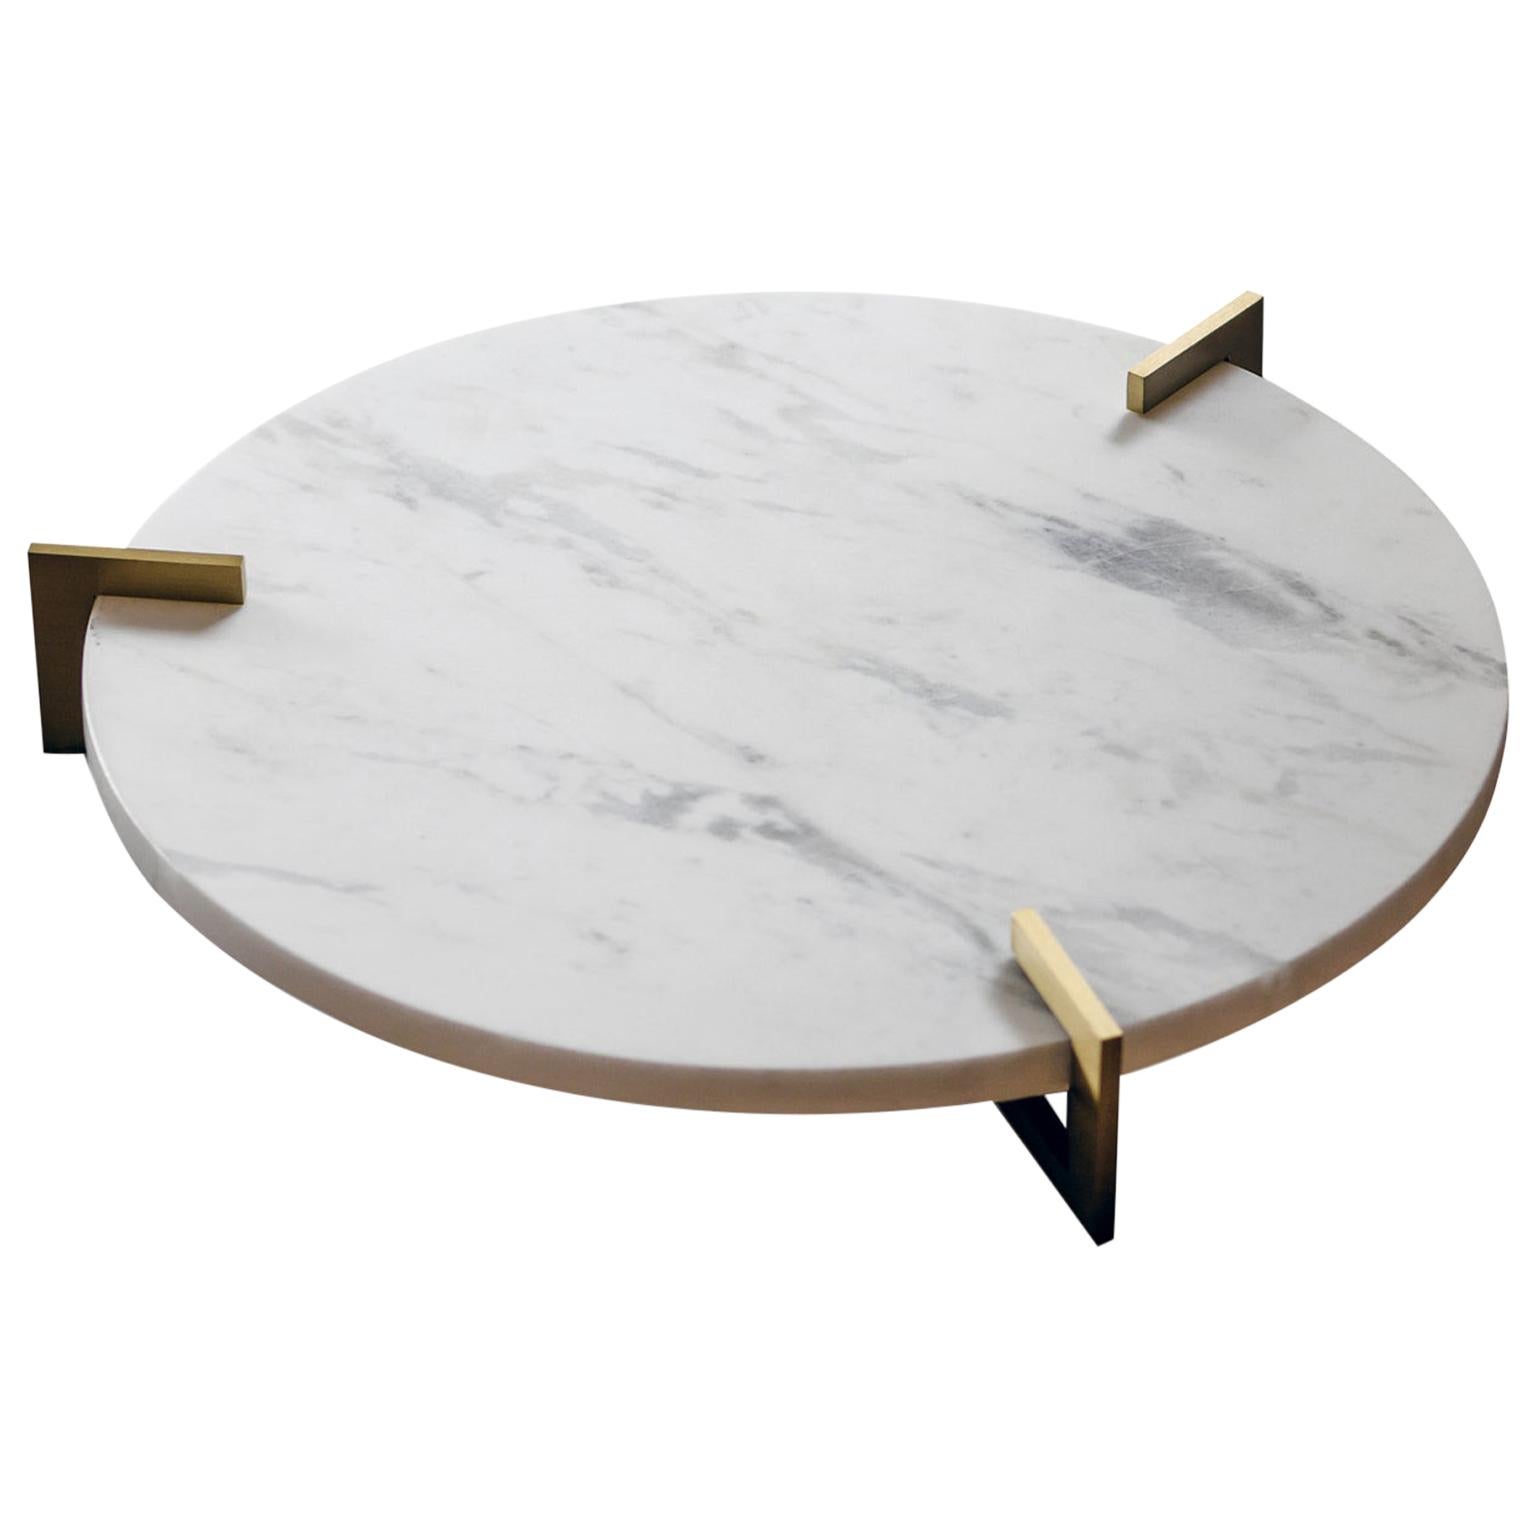 Contemporary Handcrafted Round Tray "Ophelos" in Marble and Brass by Anaktae For Sale